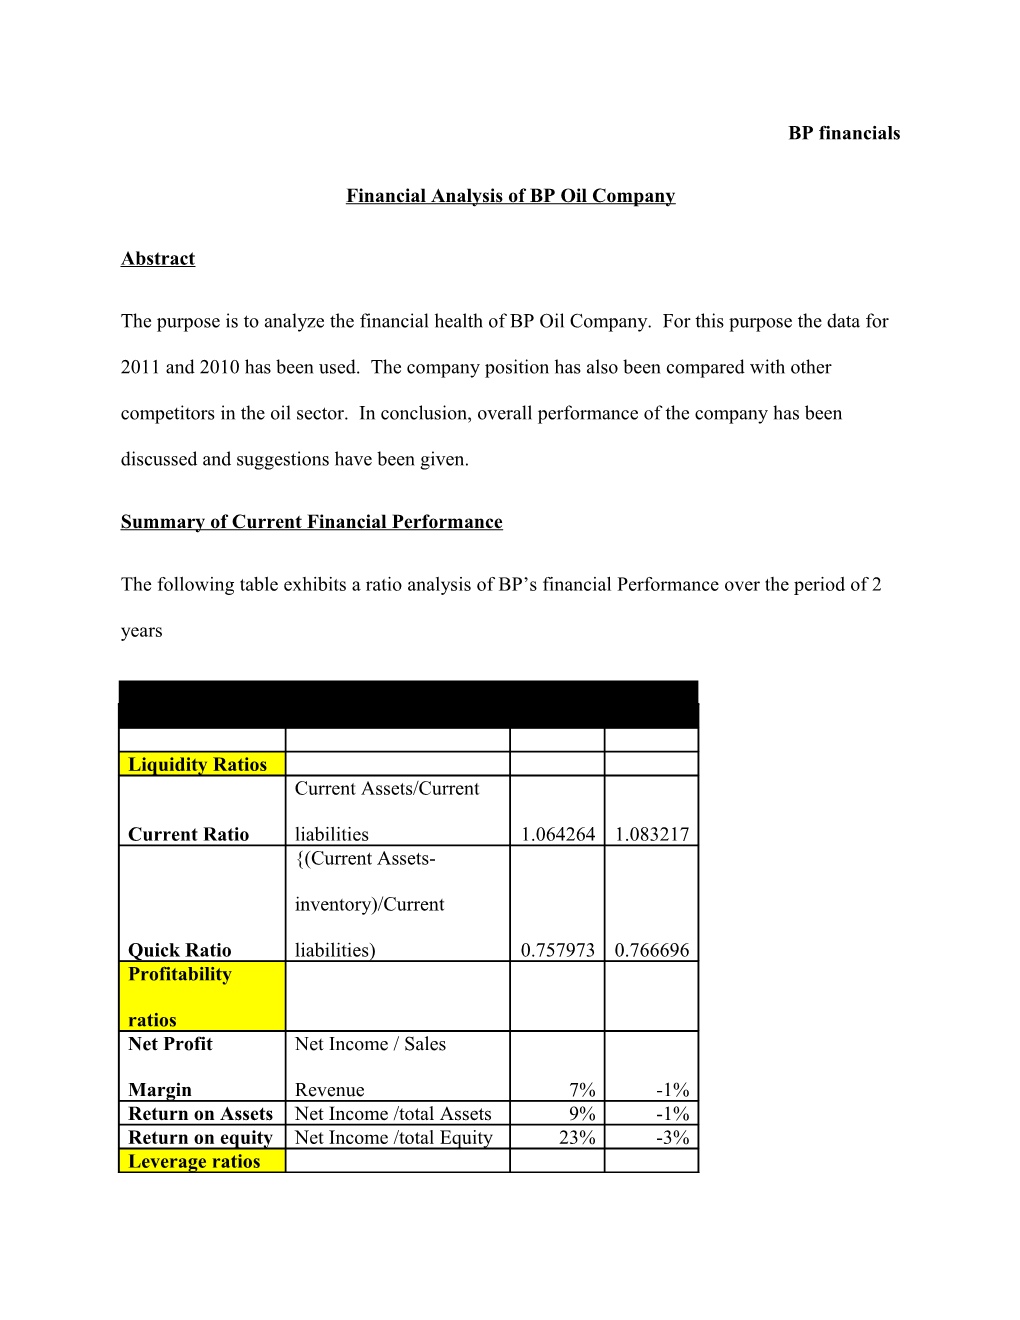 Financial Analysis of BP Oil Company